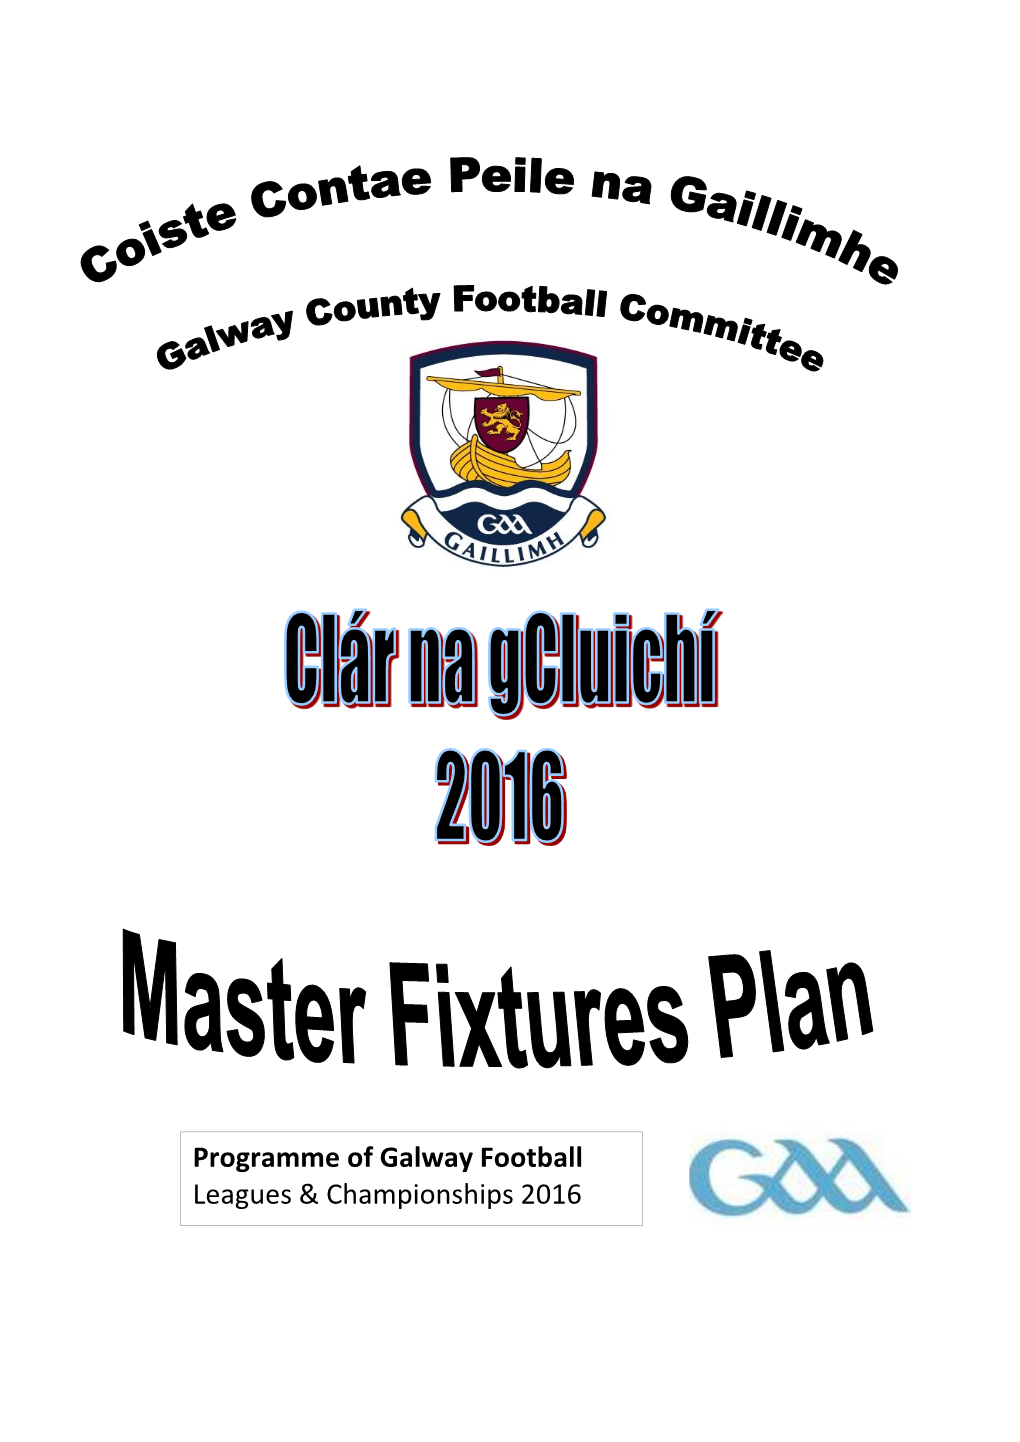 Programme of Galway Football Leagues & Championships 2016